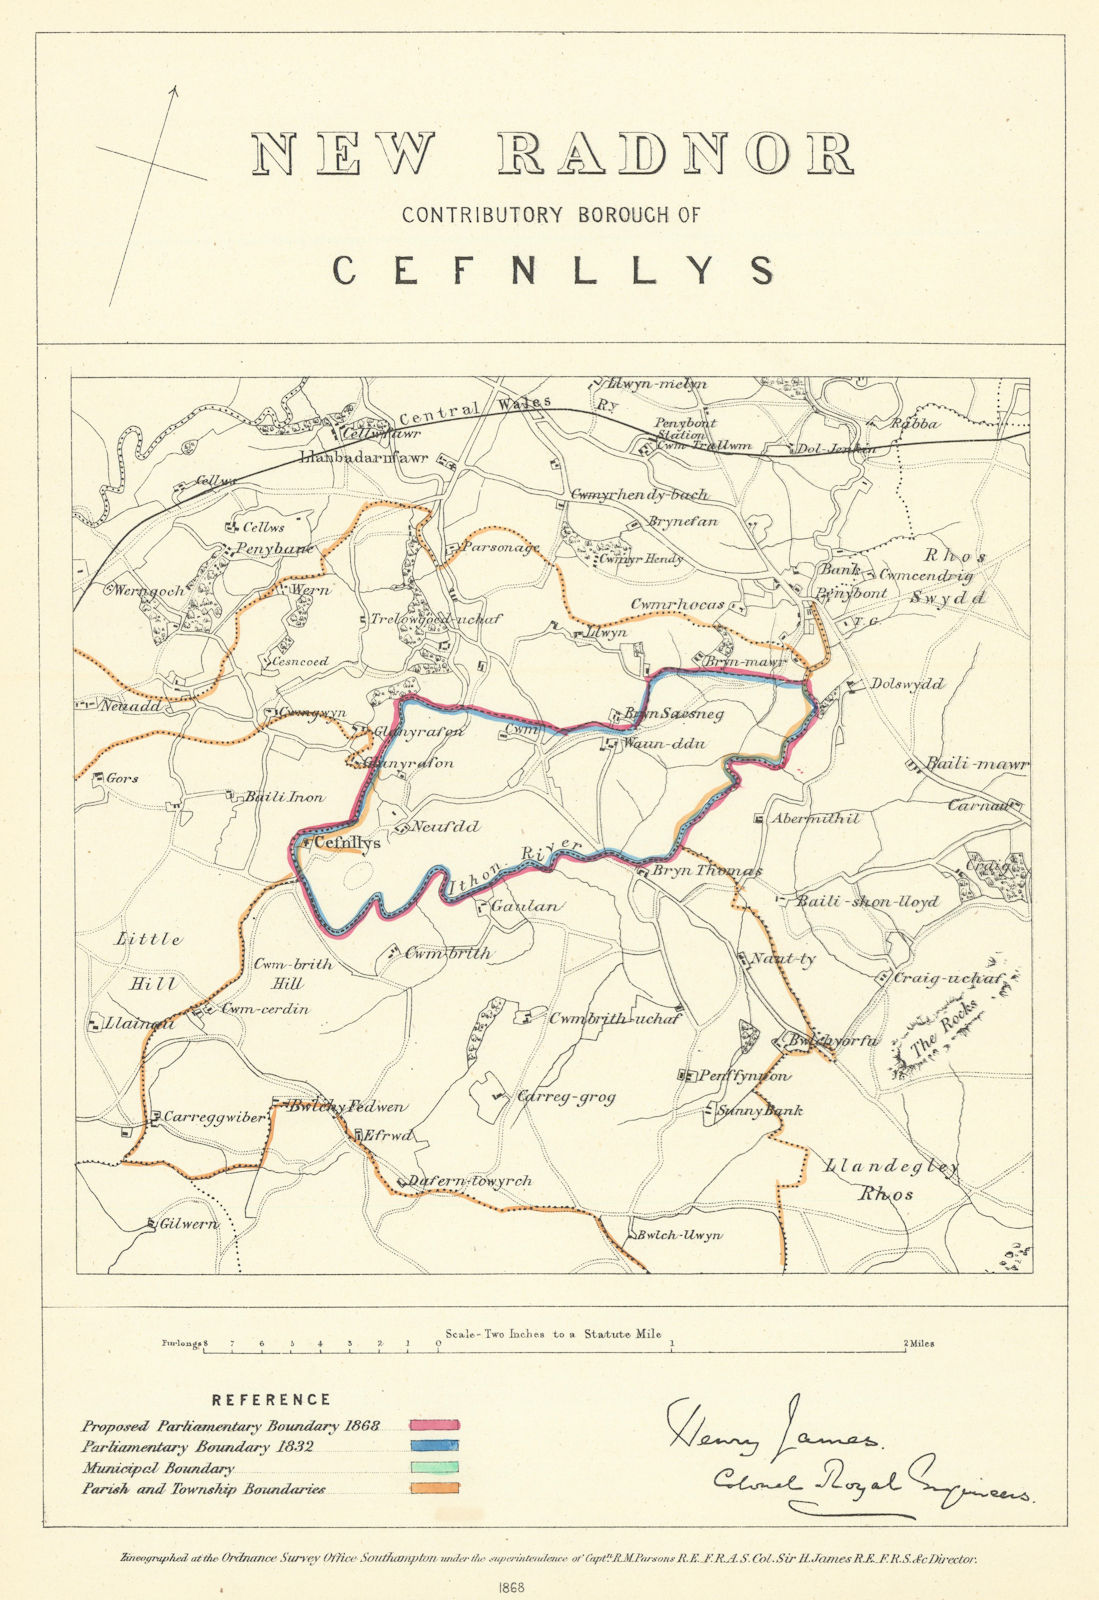 New Radnor Contributory Borough of Cefnllys. JAMES. Boundary Commission 1868 map